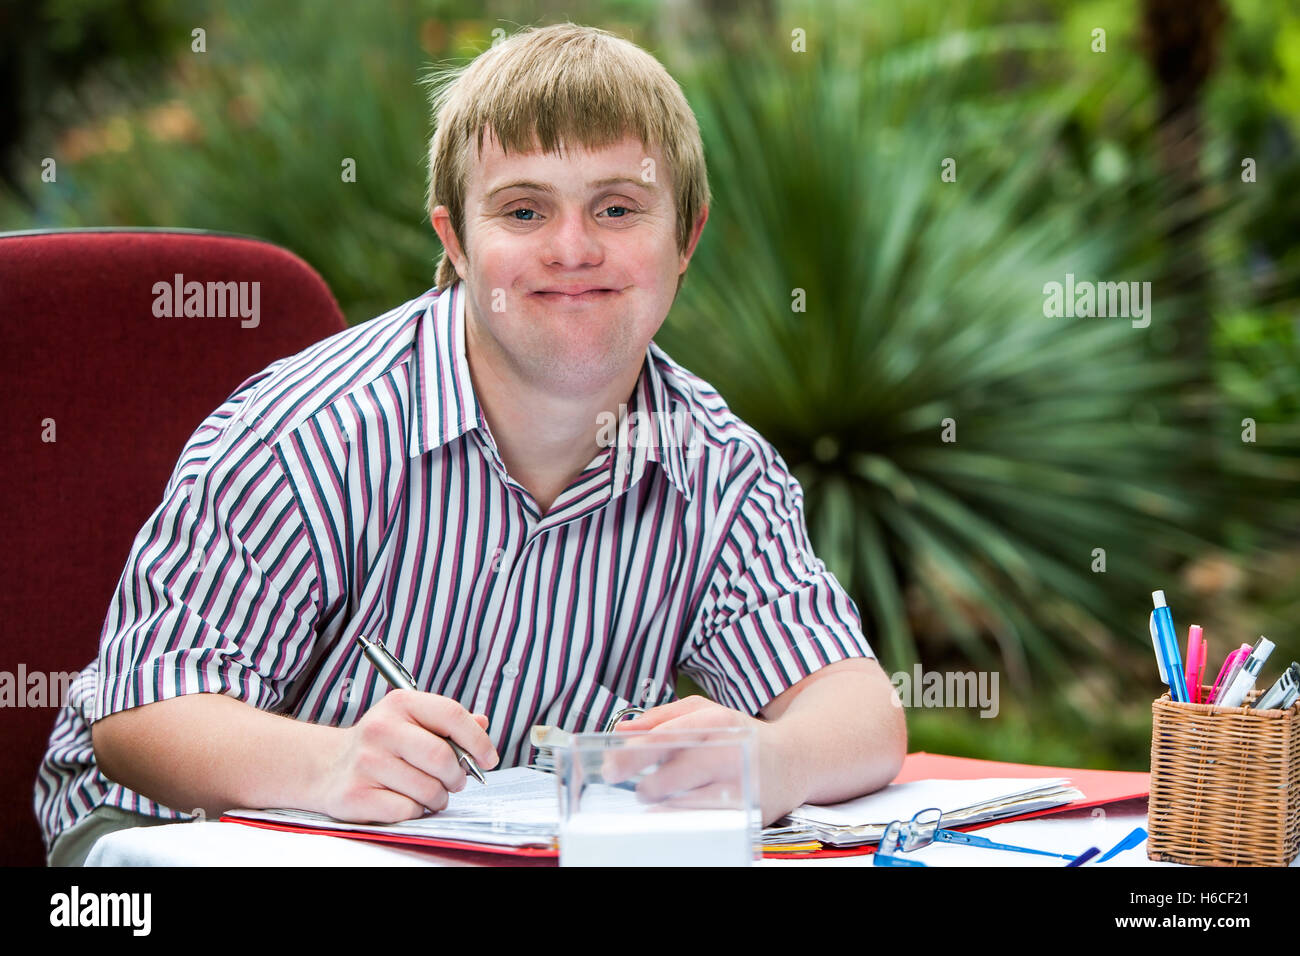 Close up portrait of young male student with down syndrome at study desk outdoors. Stock Photo